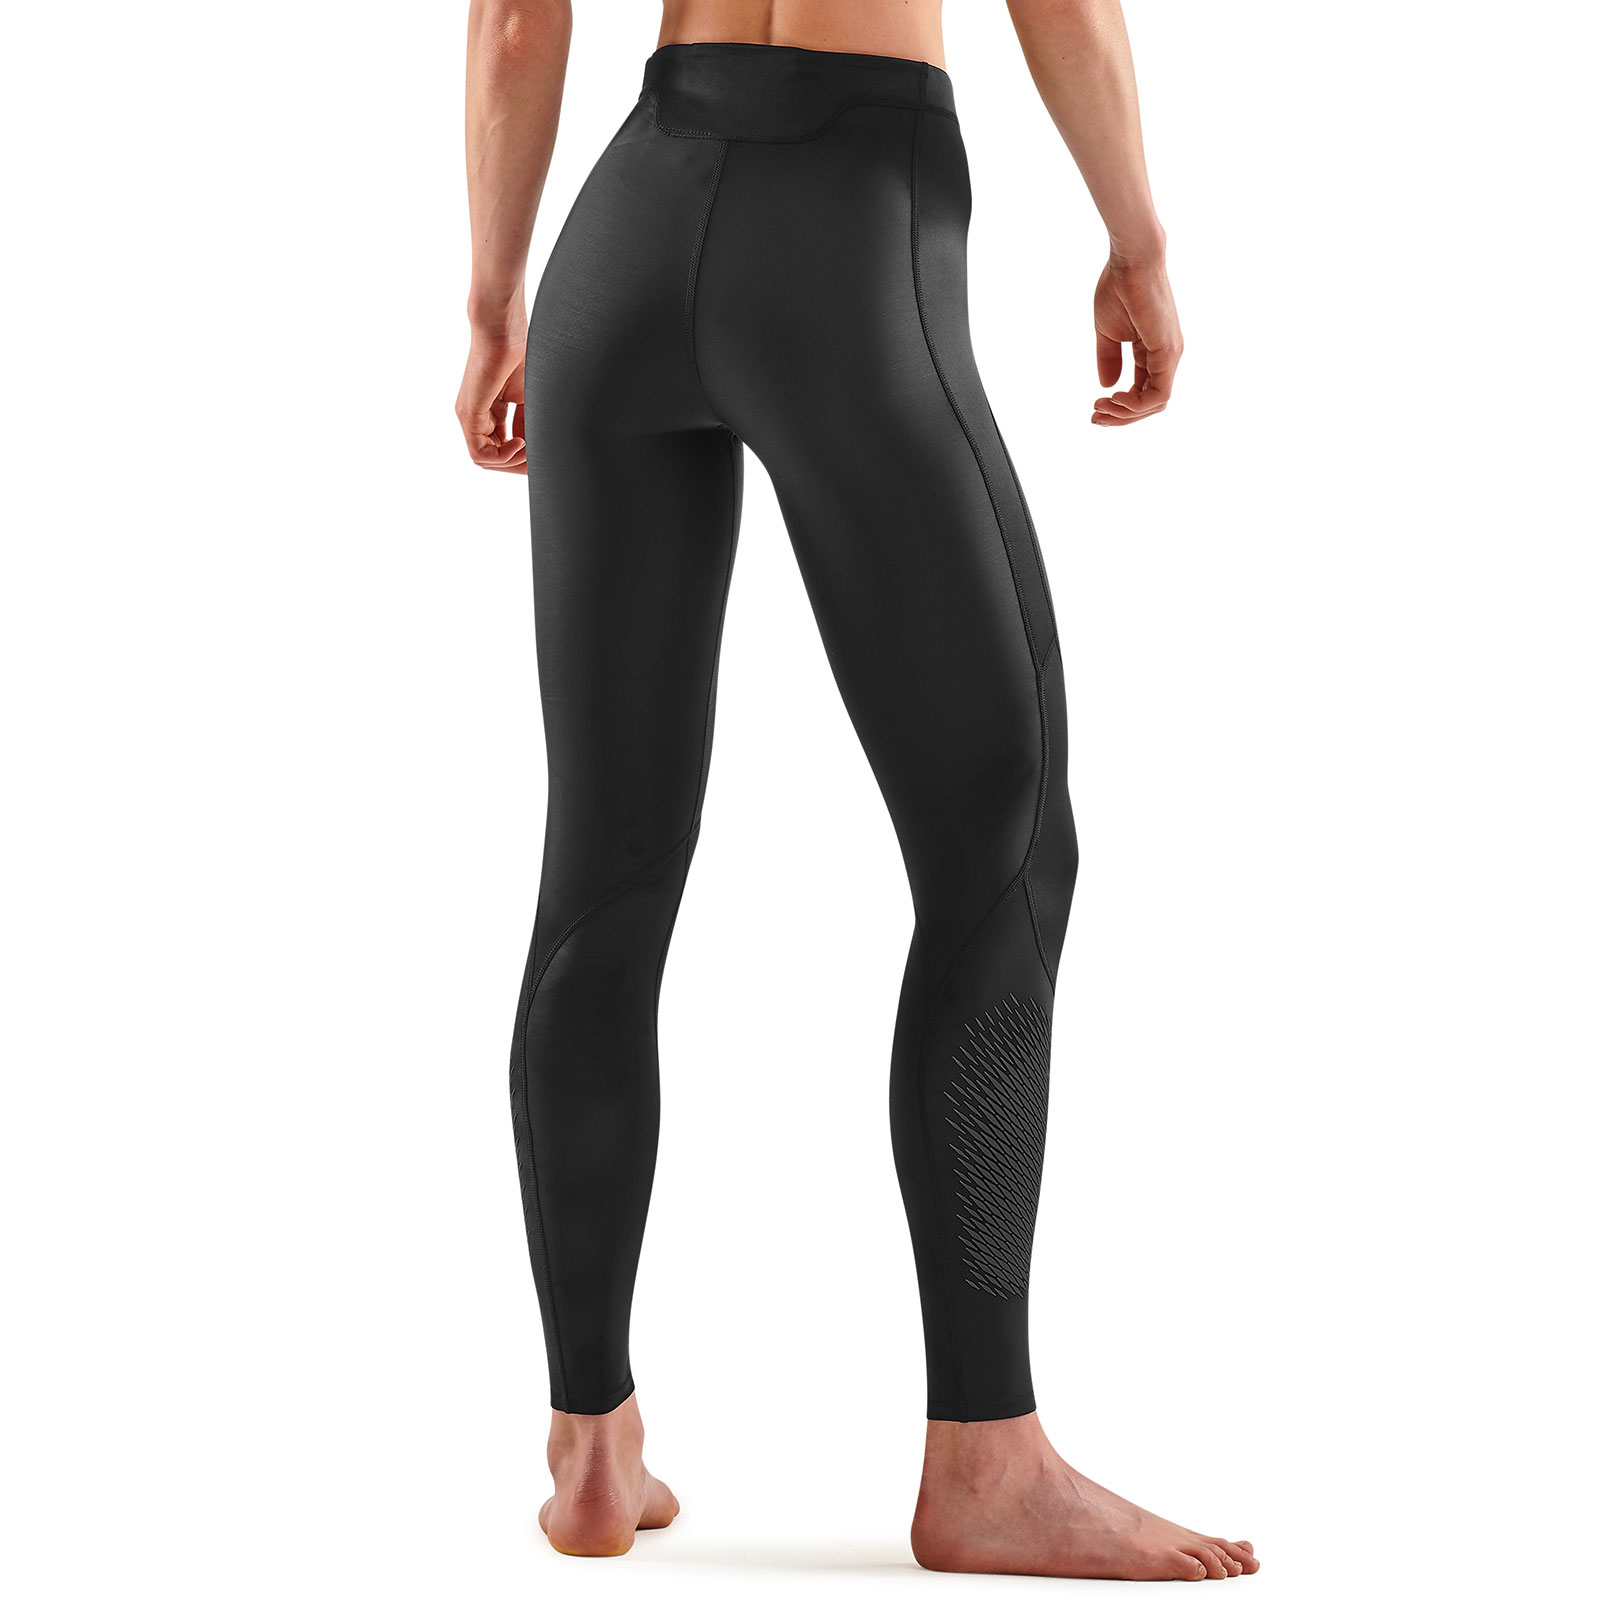 Skins A400 Youth Compression Long Tights (Black), BRAND NEW